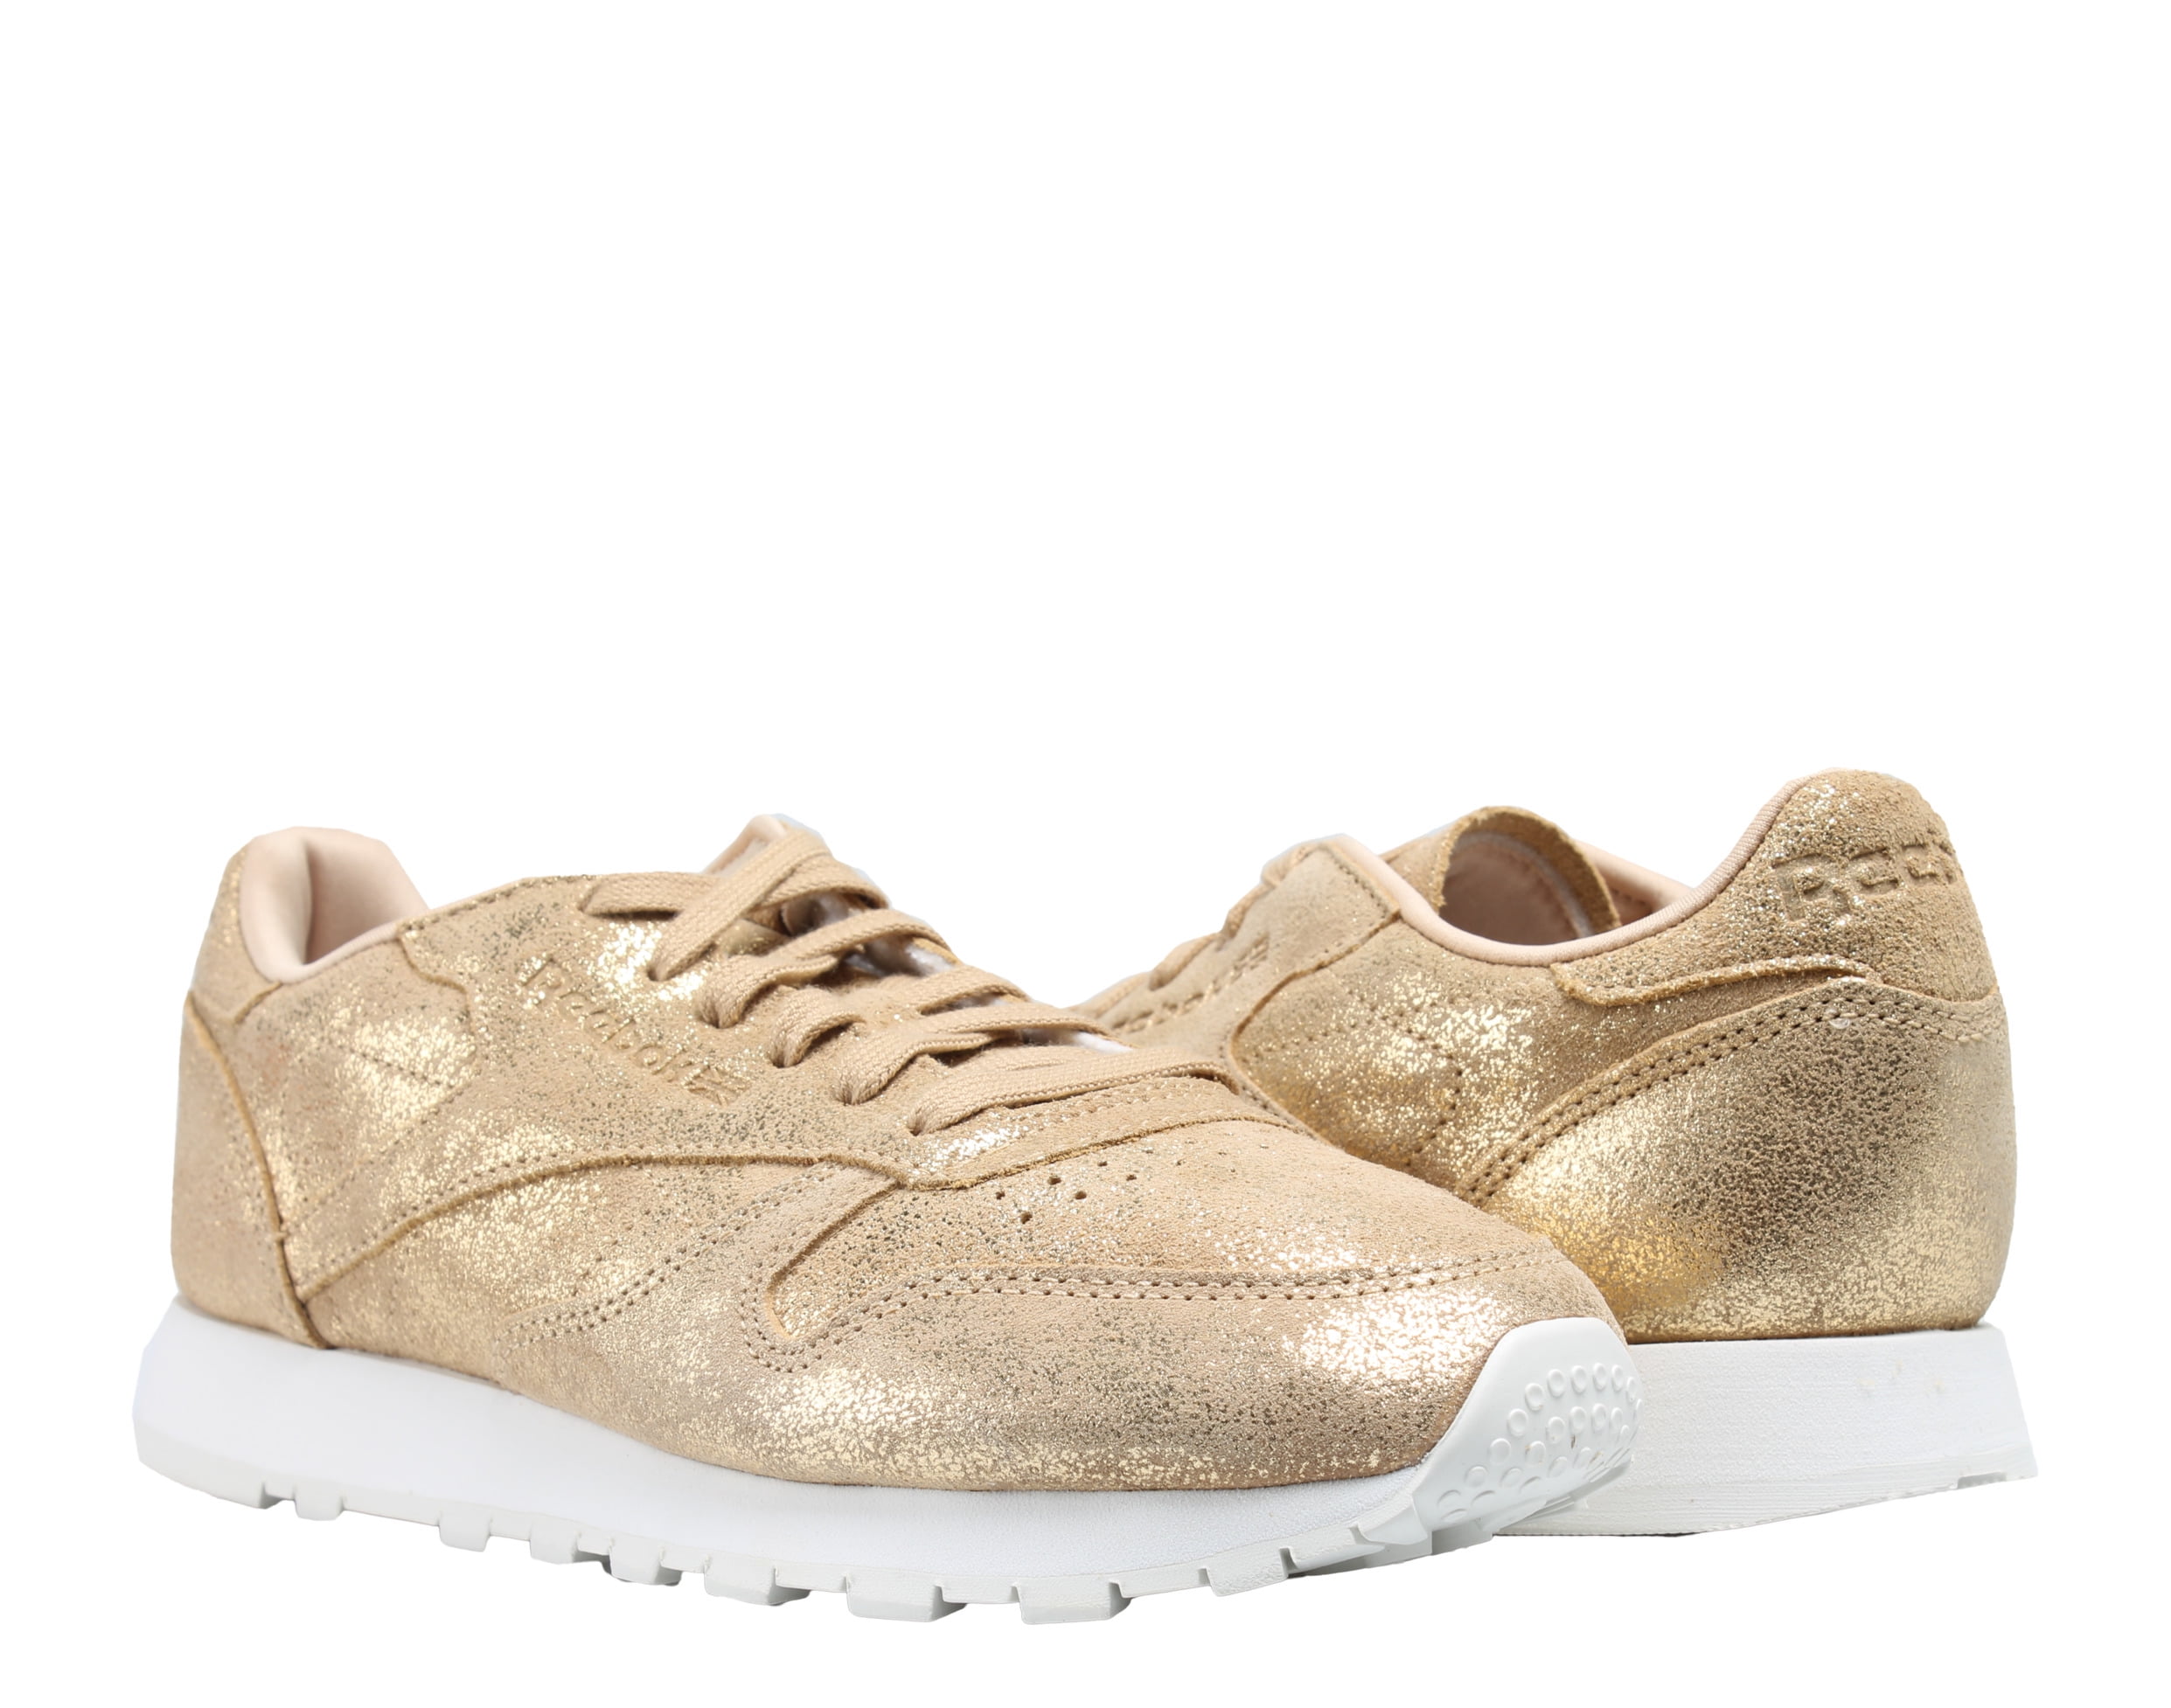 Reebok Classic Leather Shimmer Gold 